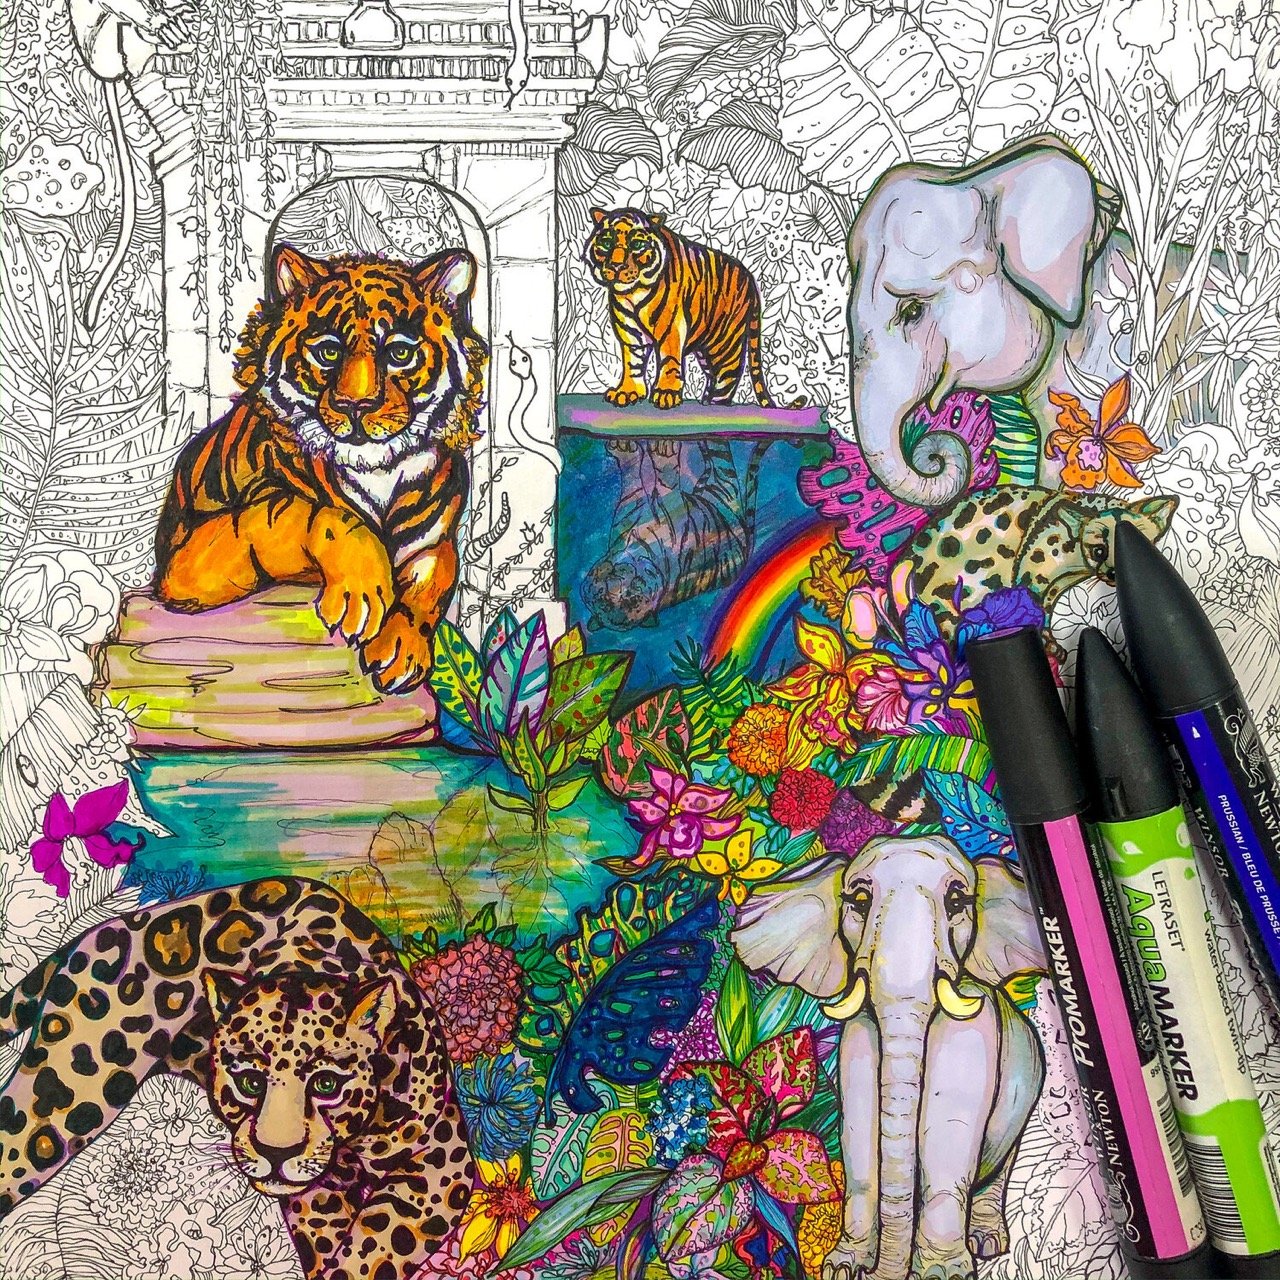 Elephant, Tiger and Jaguar Illustration in Colourful Ink by Marcella Wylie